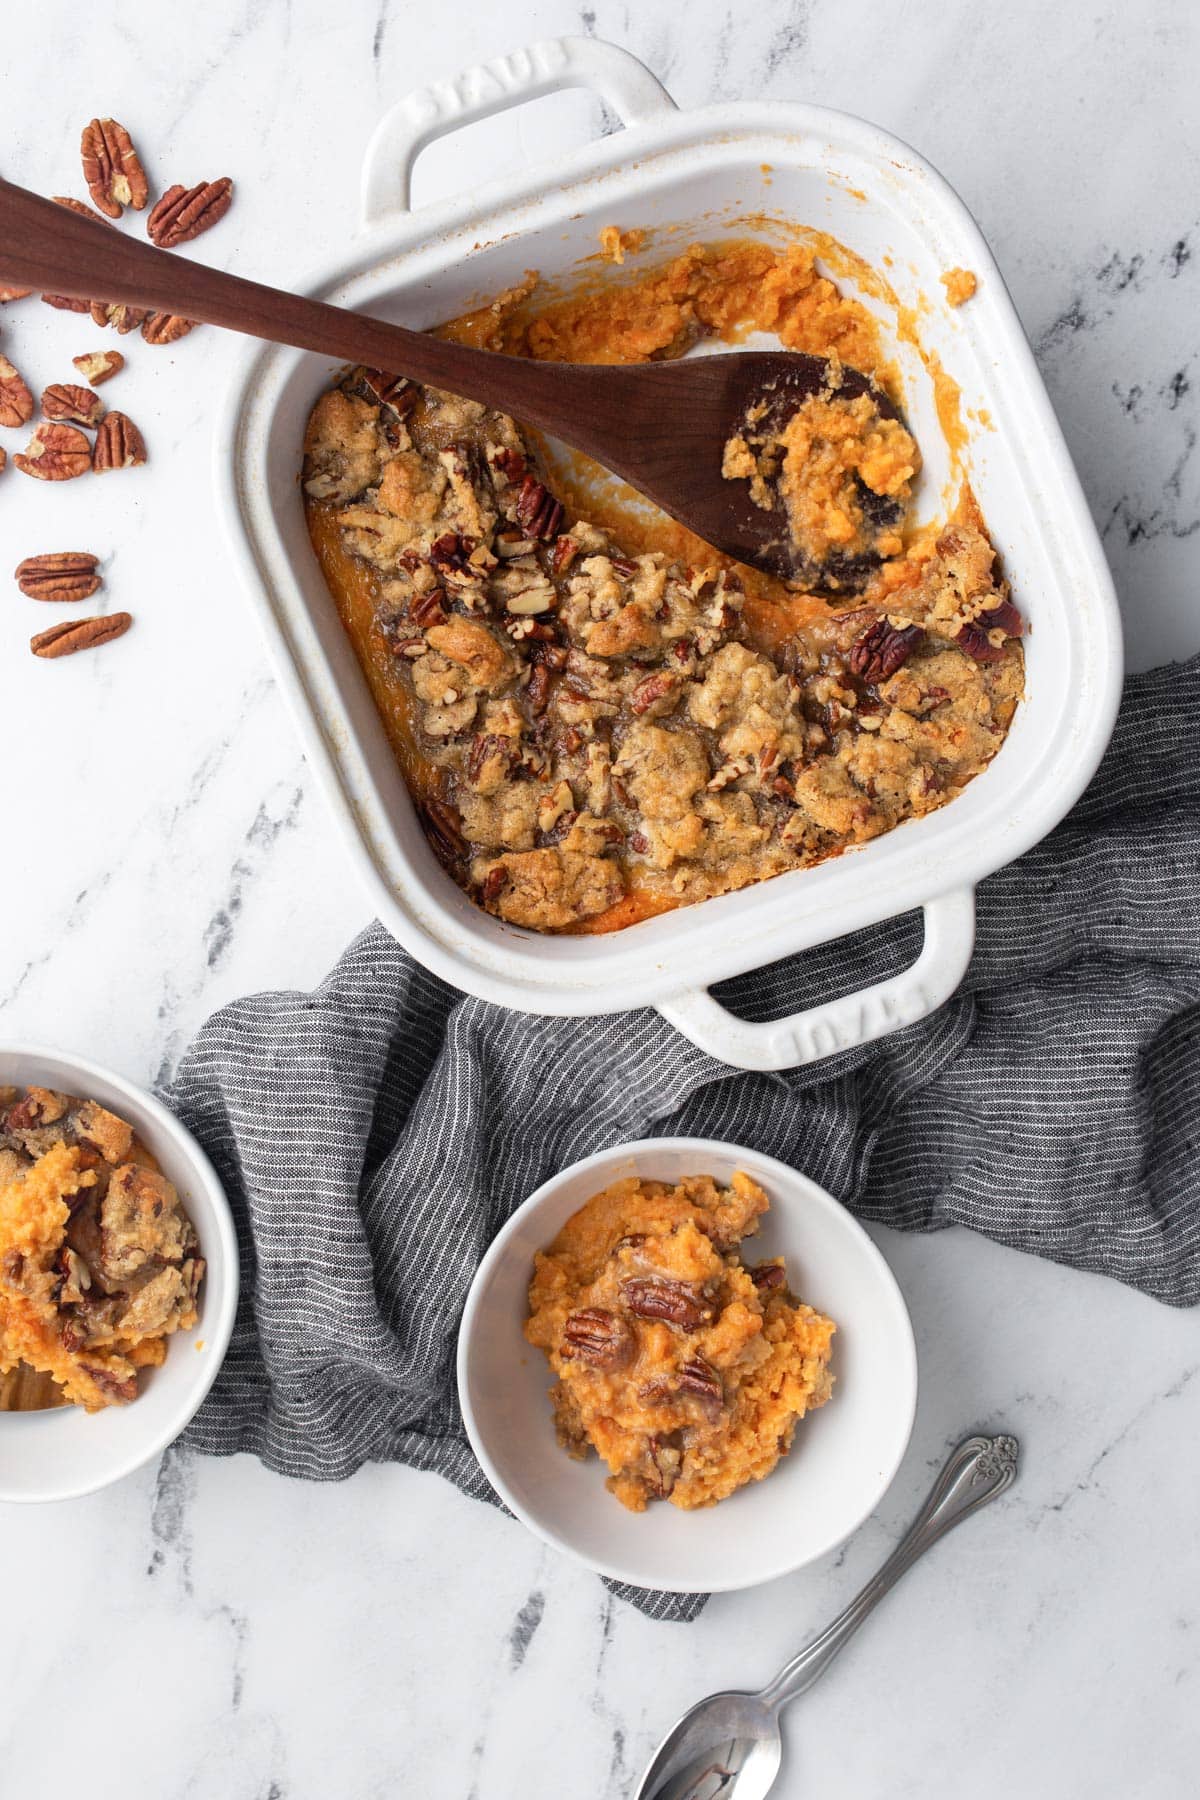 Sweet potato casserole in a white 9x9 baking dish with two servings in matching white bowls.